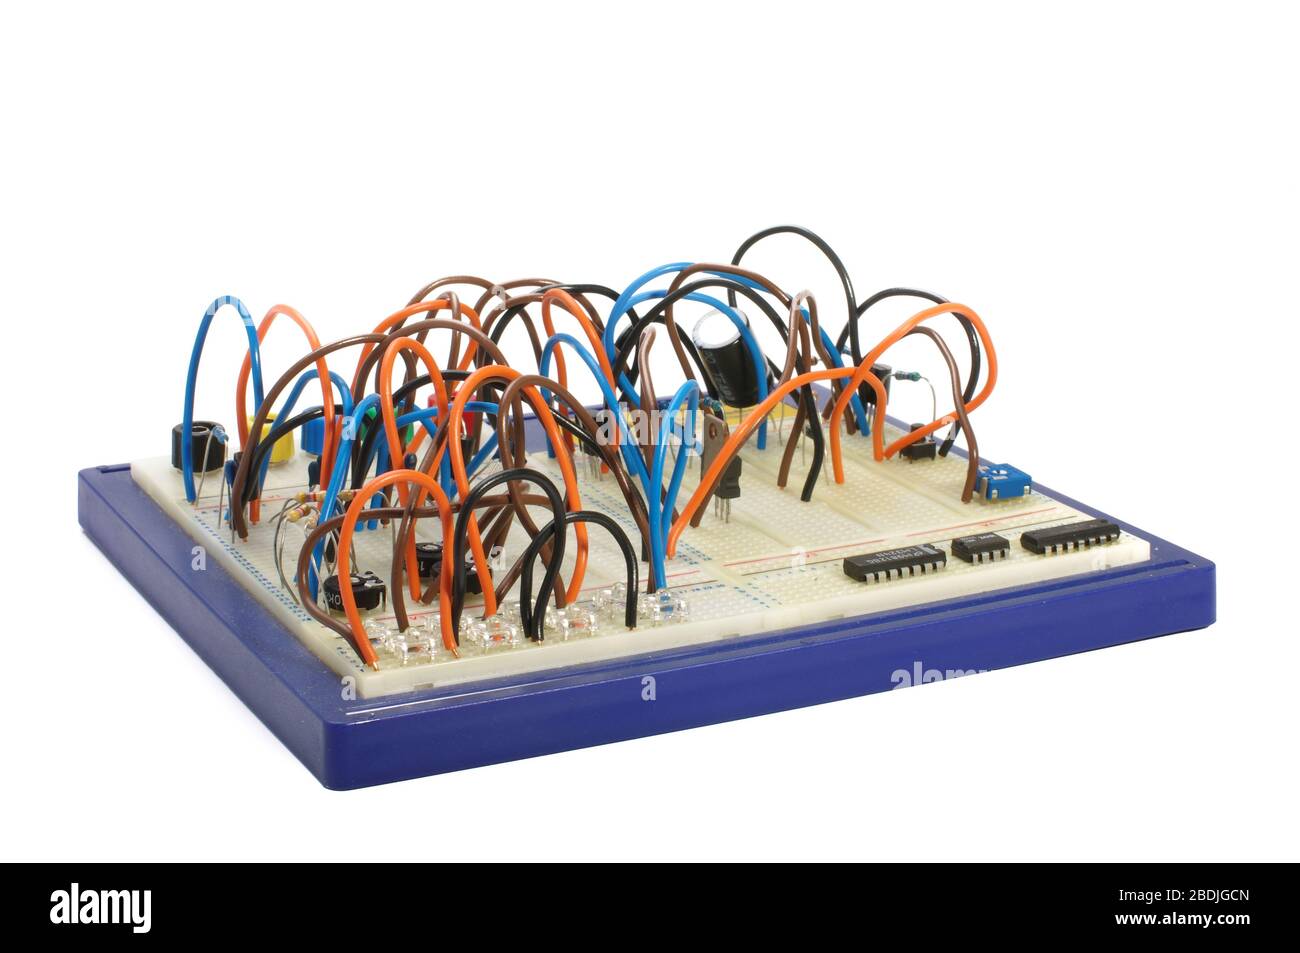 Project: Multiple LEDs on a Breadboard - Learn by Digital Harbor Foundation